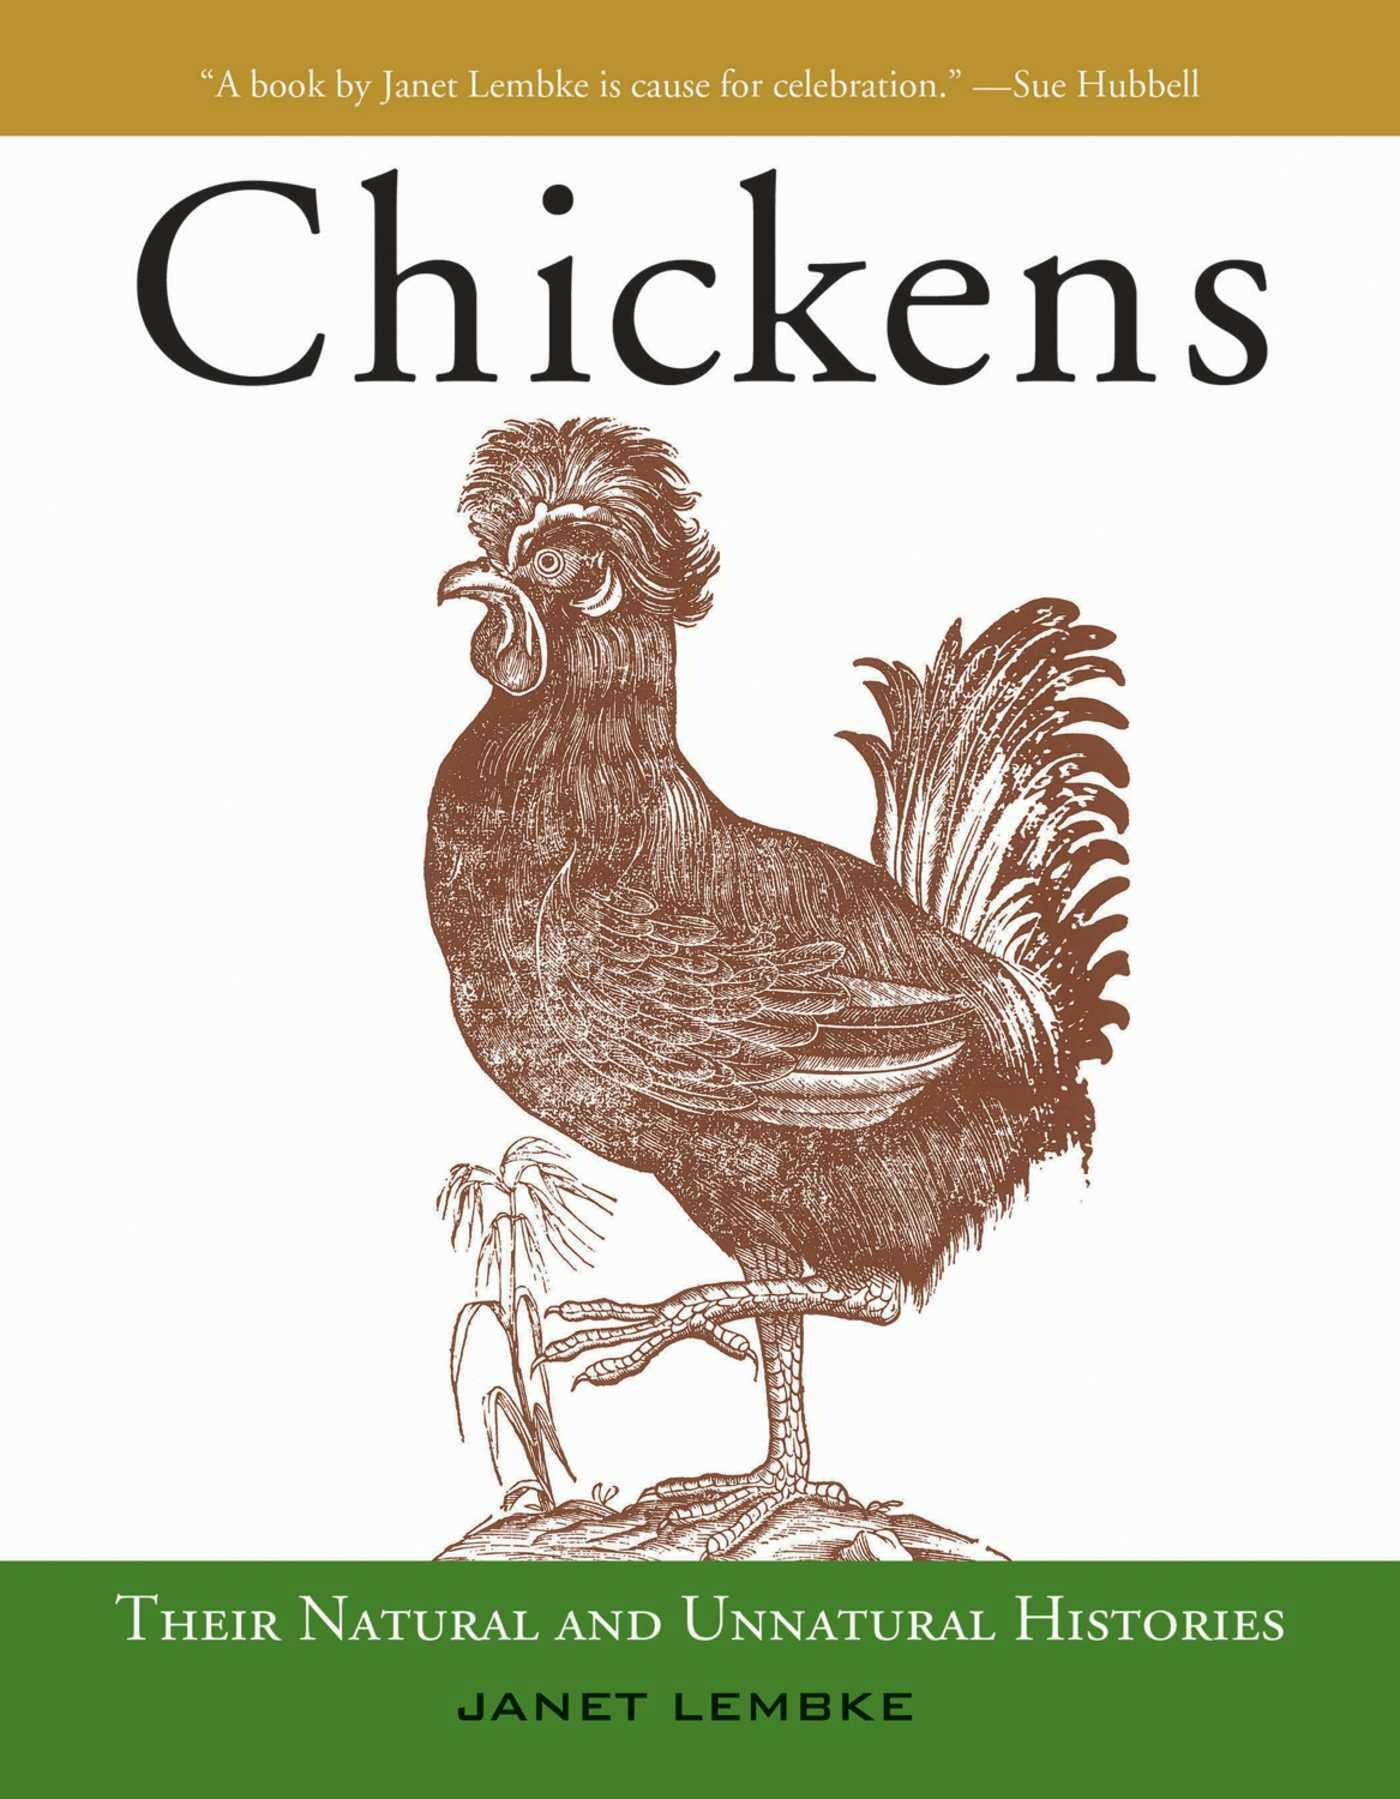 Chickens: Their Natural and Unnatural Histories - Janet Lembke